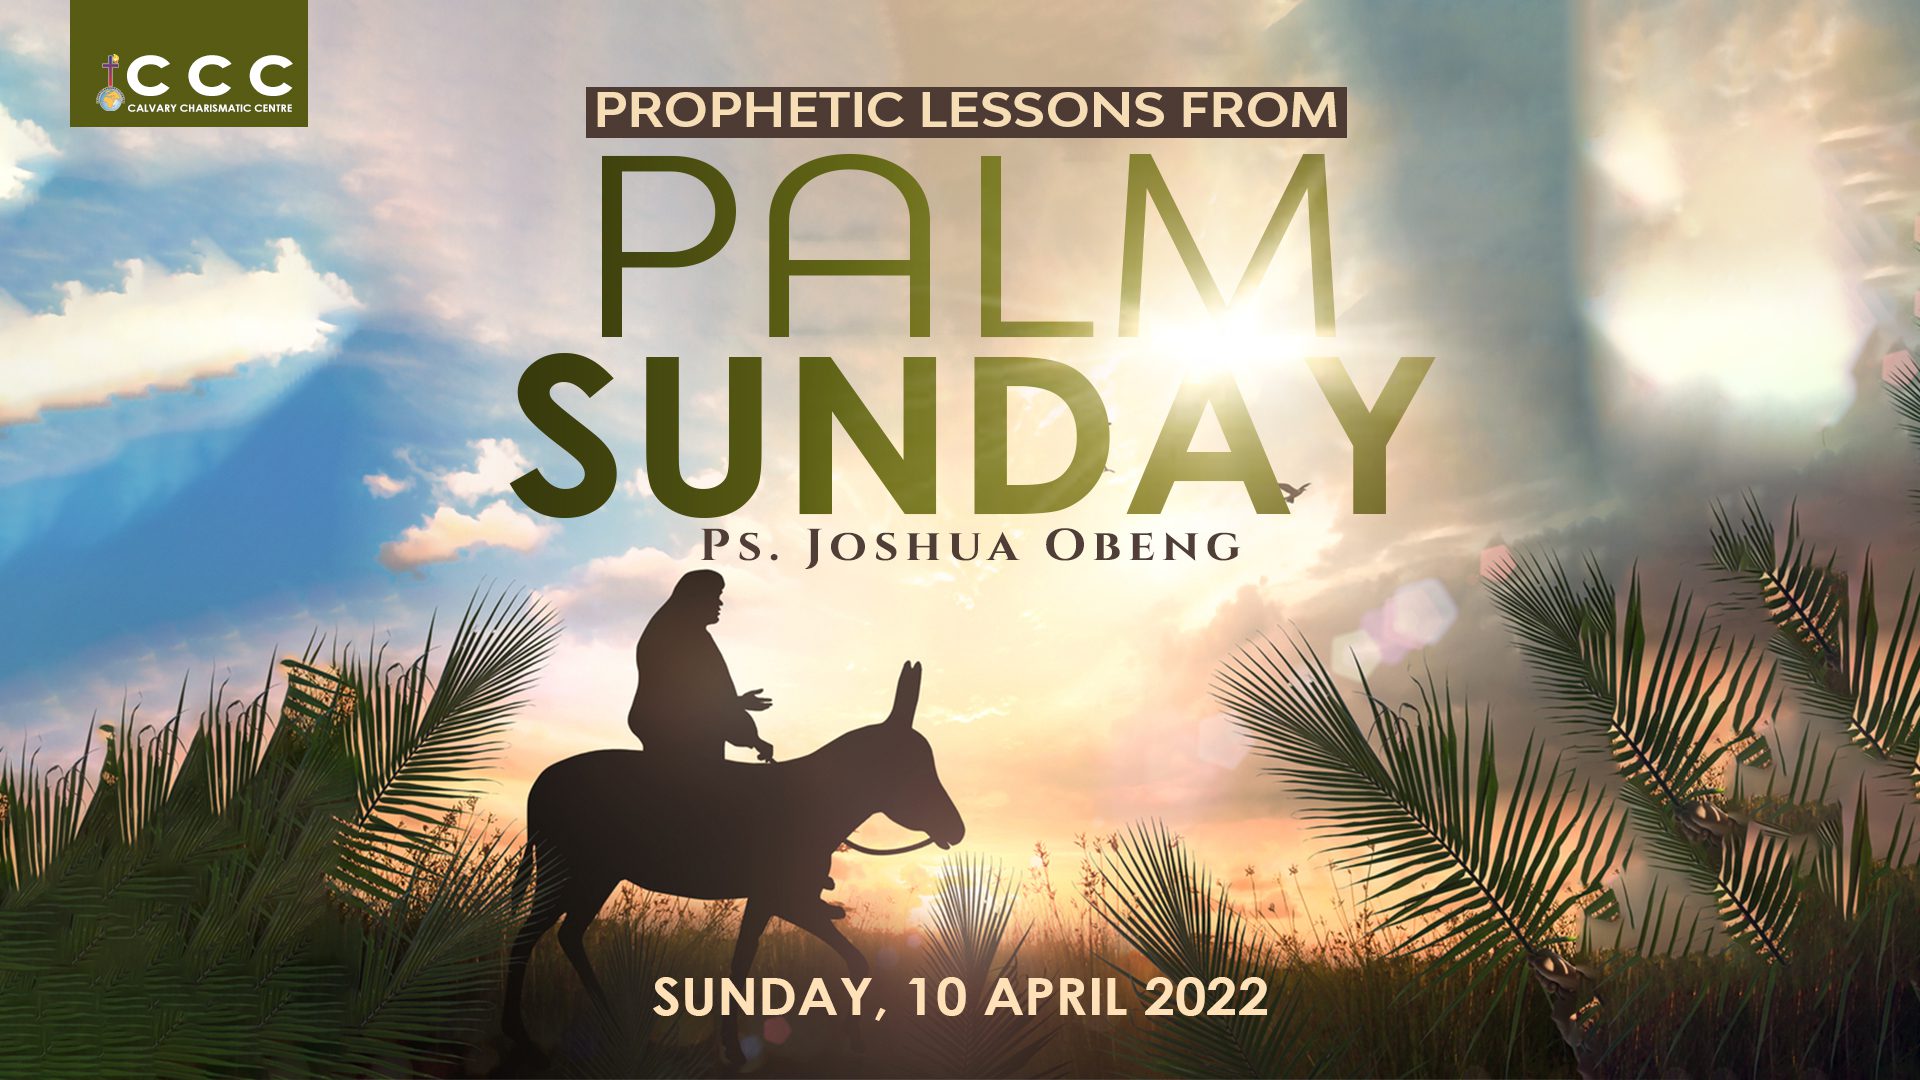 PROPHETIC LESSONS FROM PALM SUNDAY